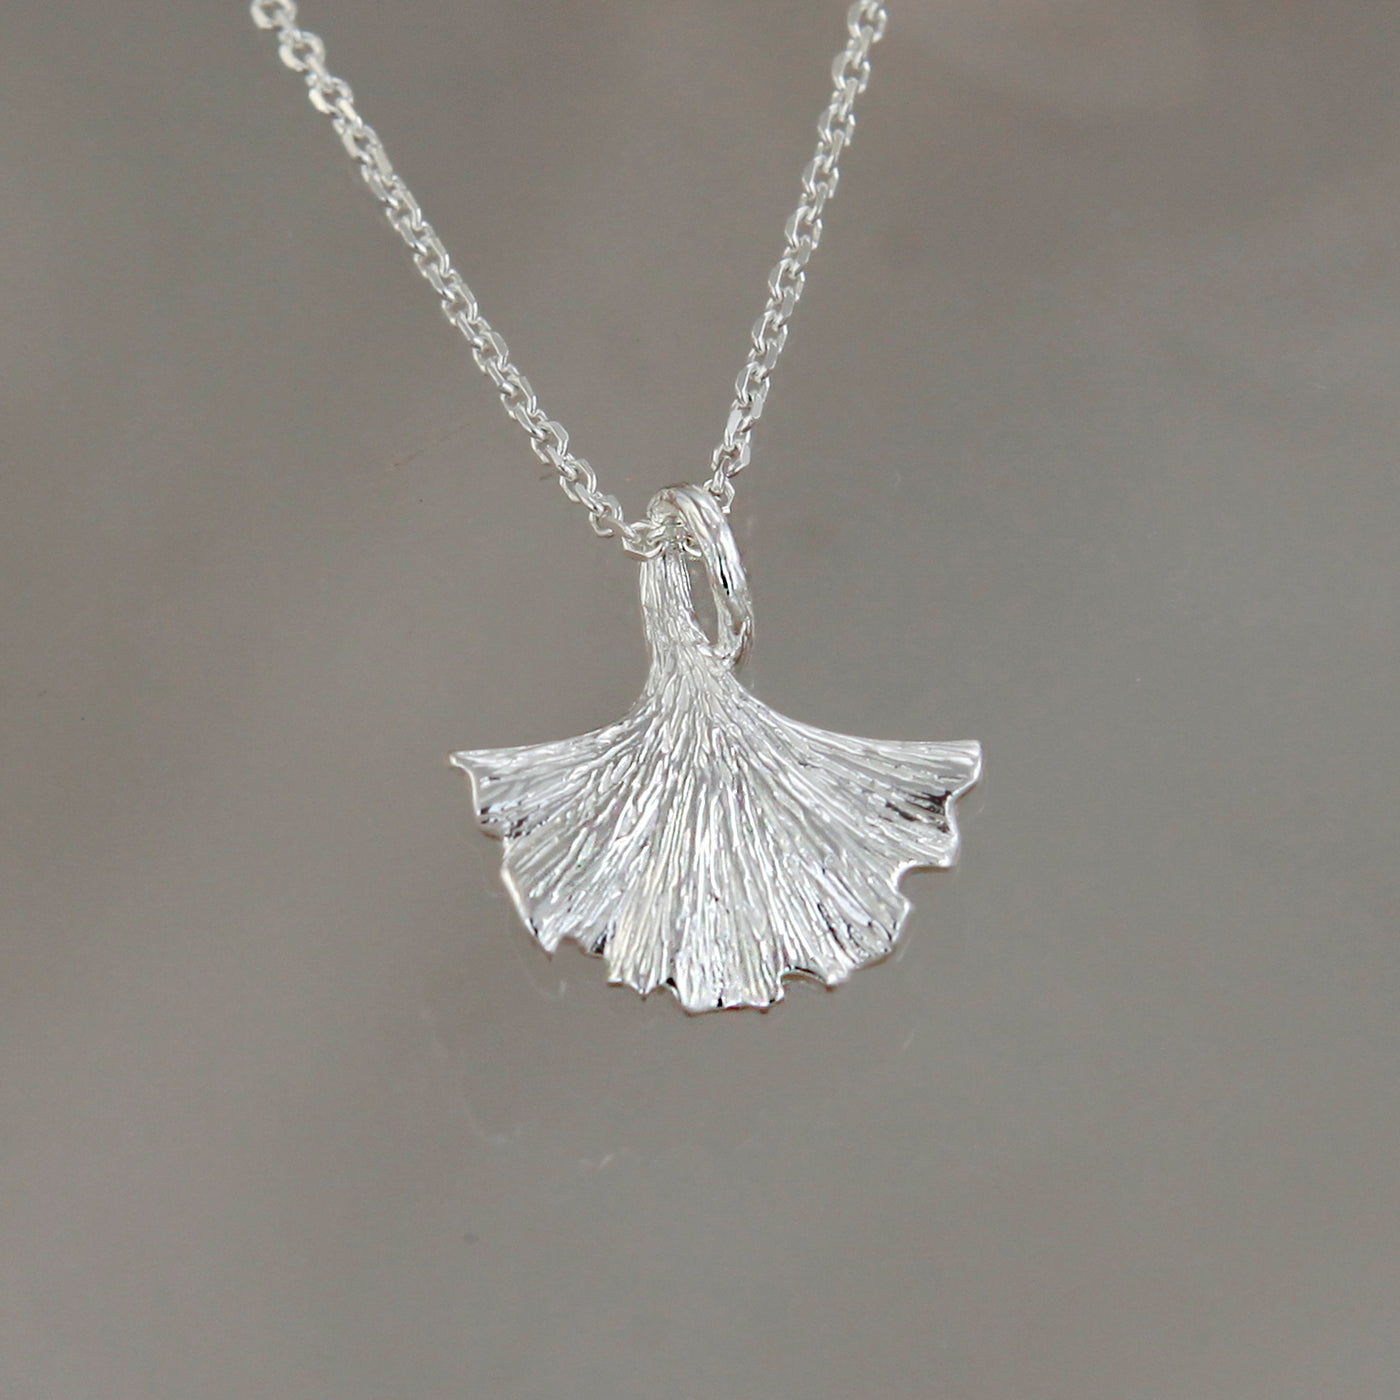 Ginkgo Leaf Necklace Pendant In Silver